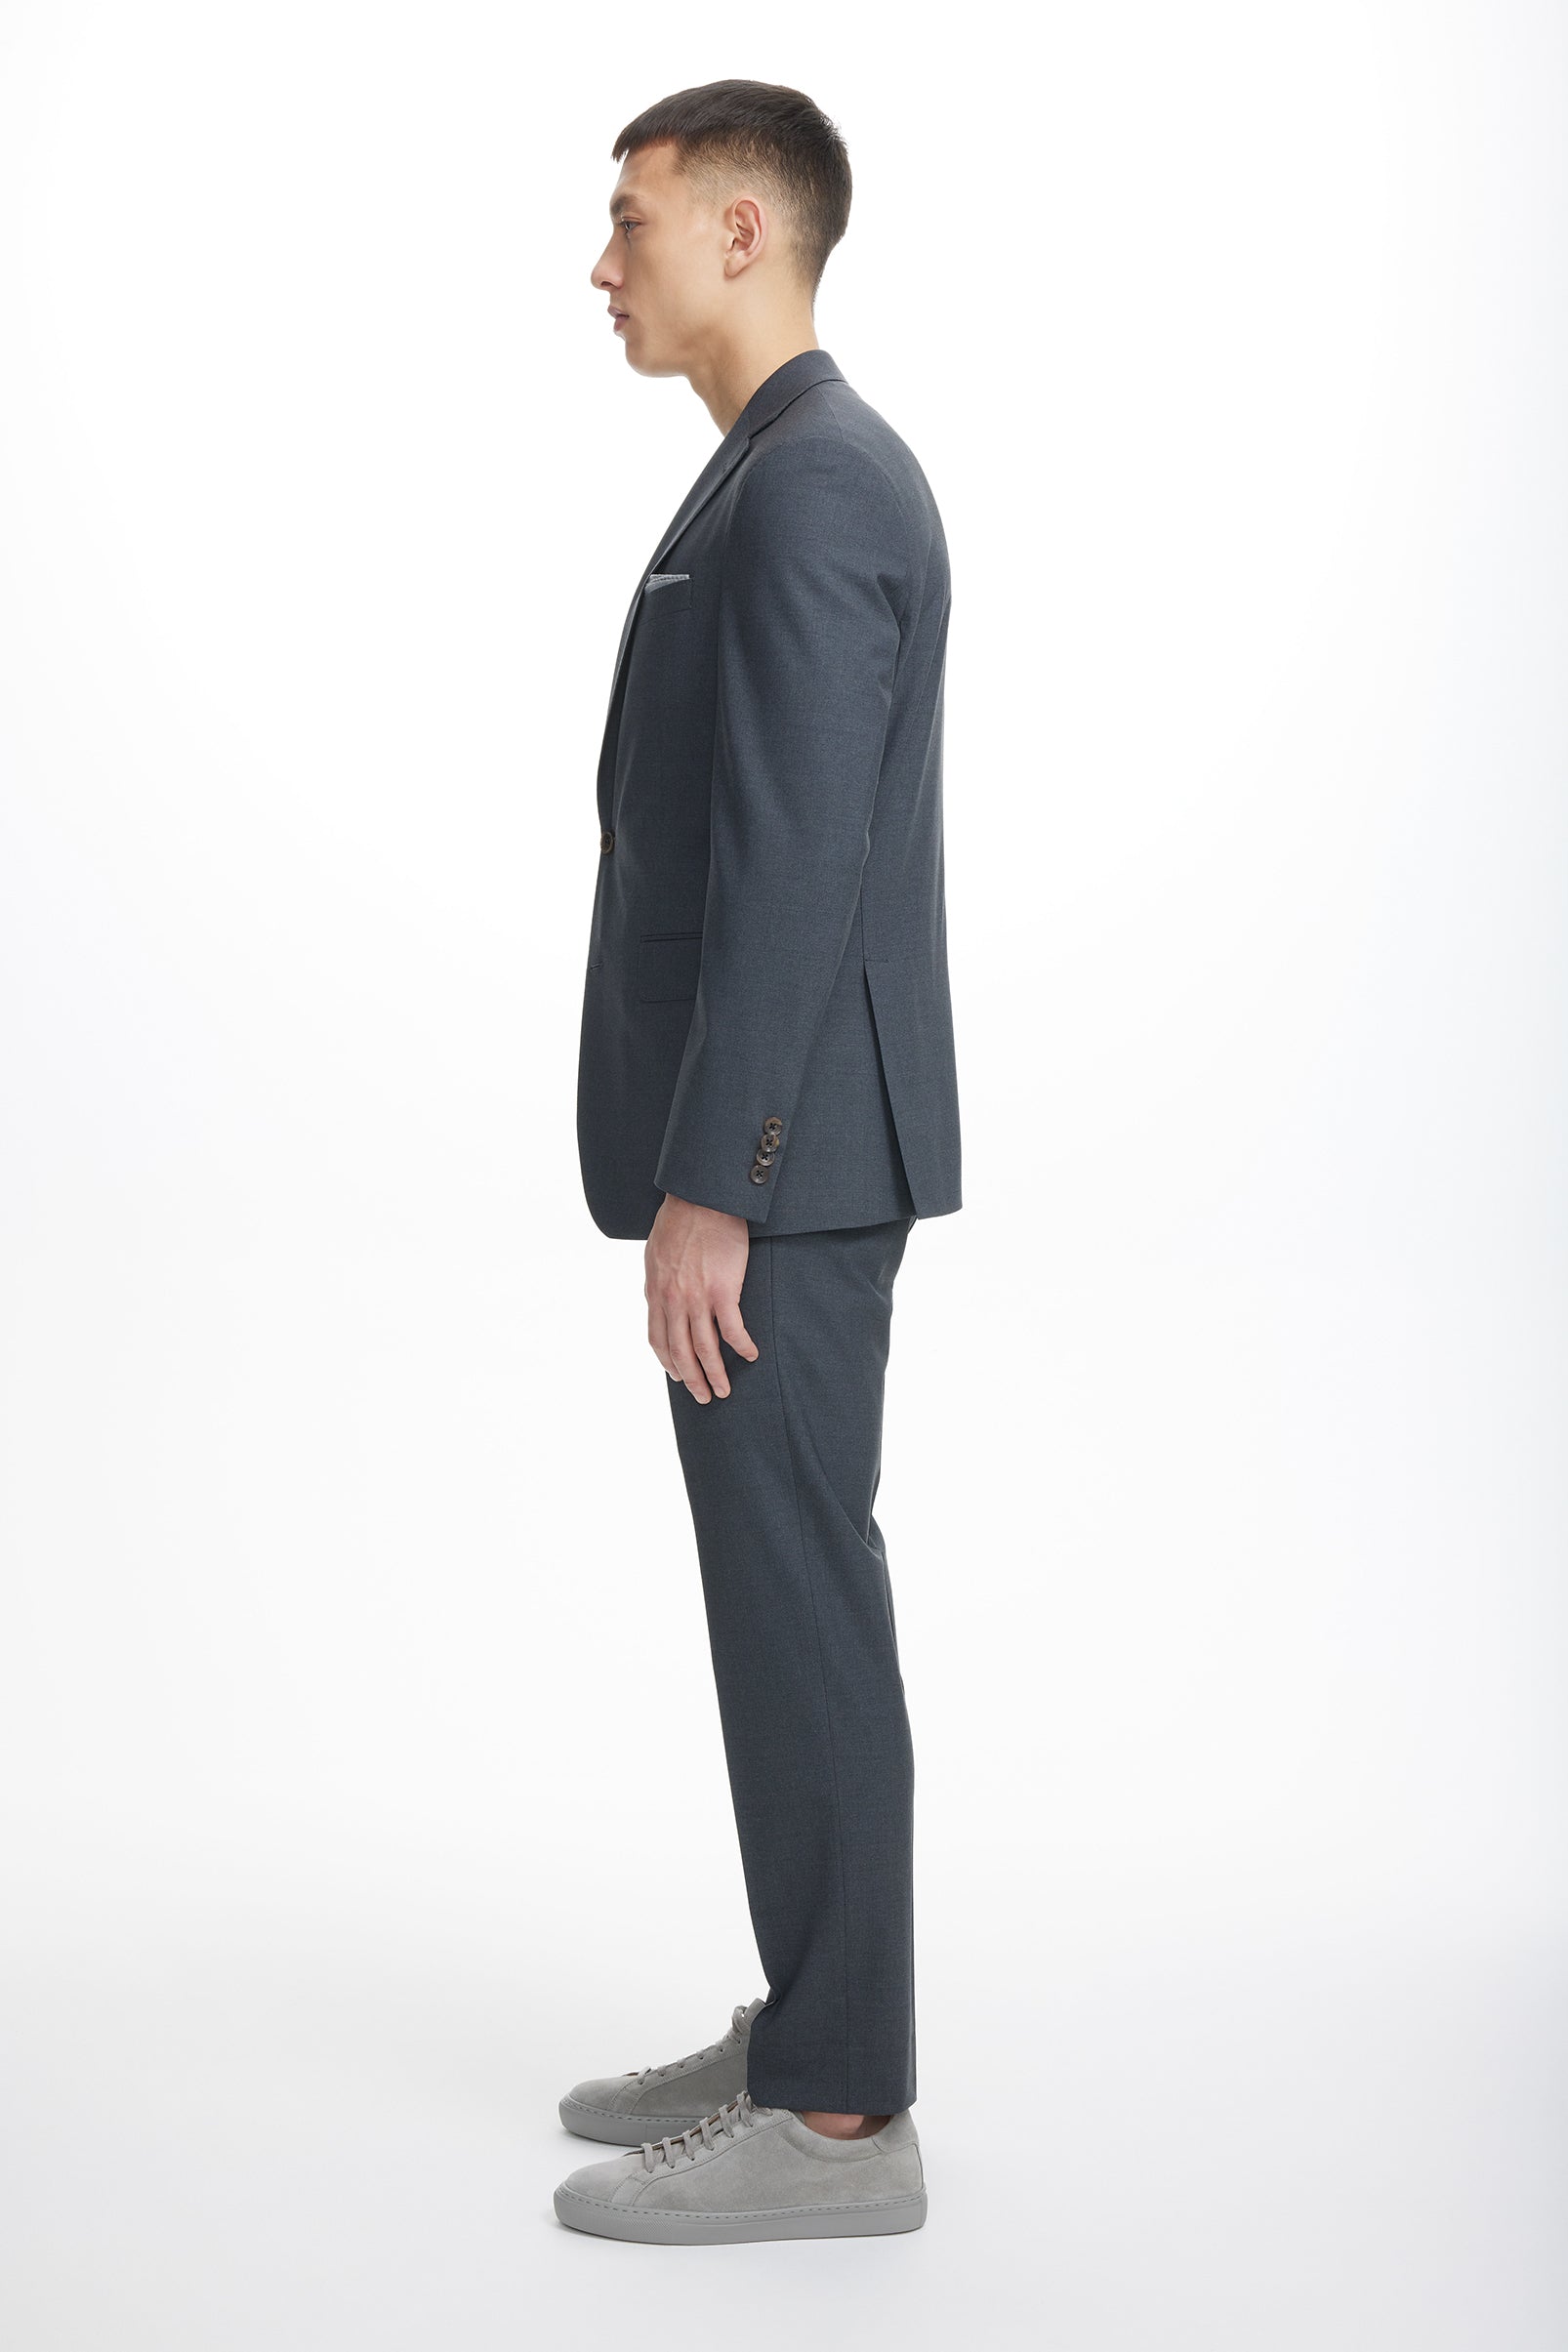 Alt view 4 Dean Solid Wool Stretch Suit in Charcoal